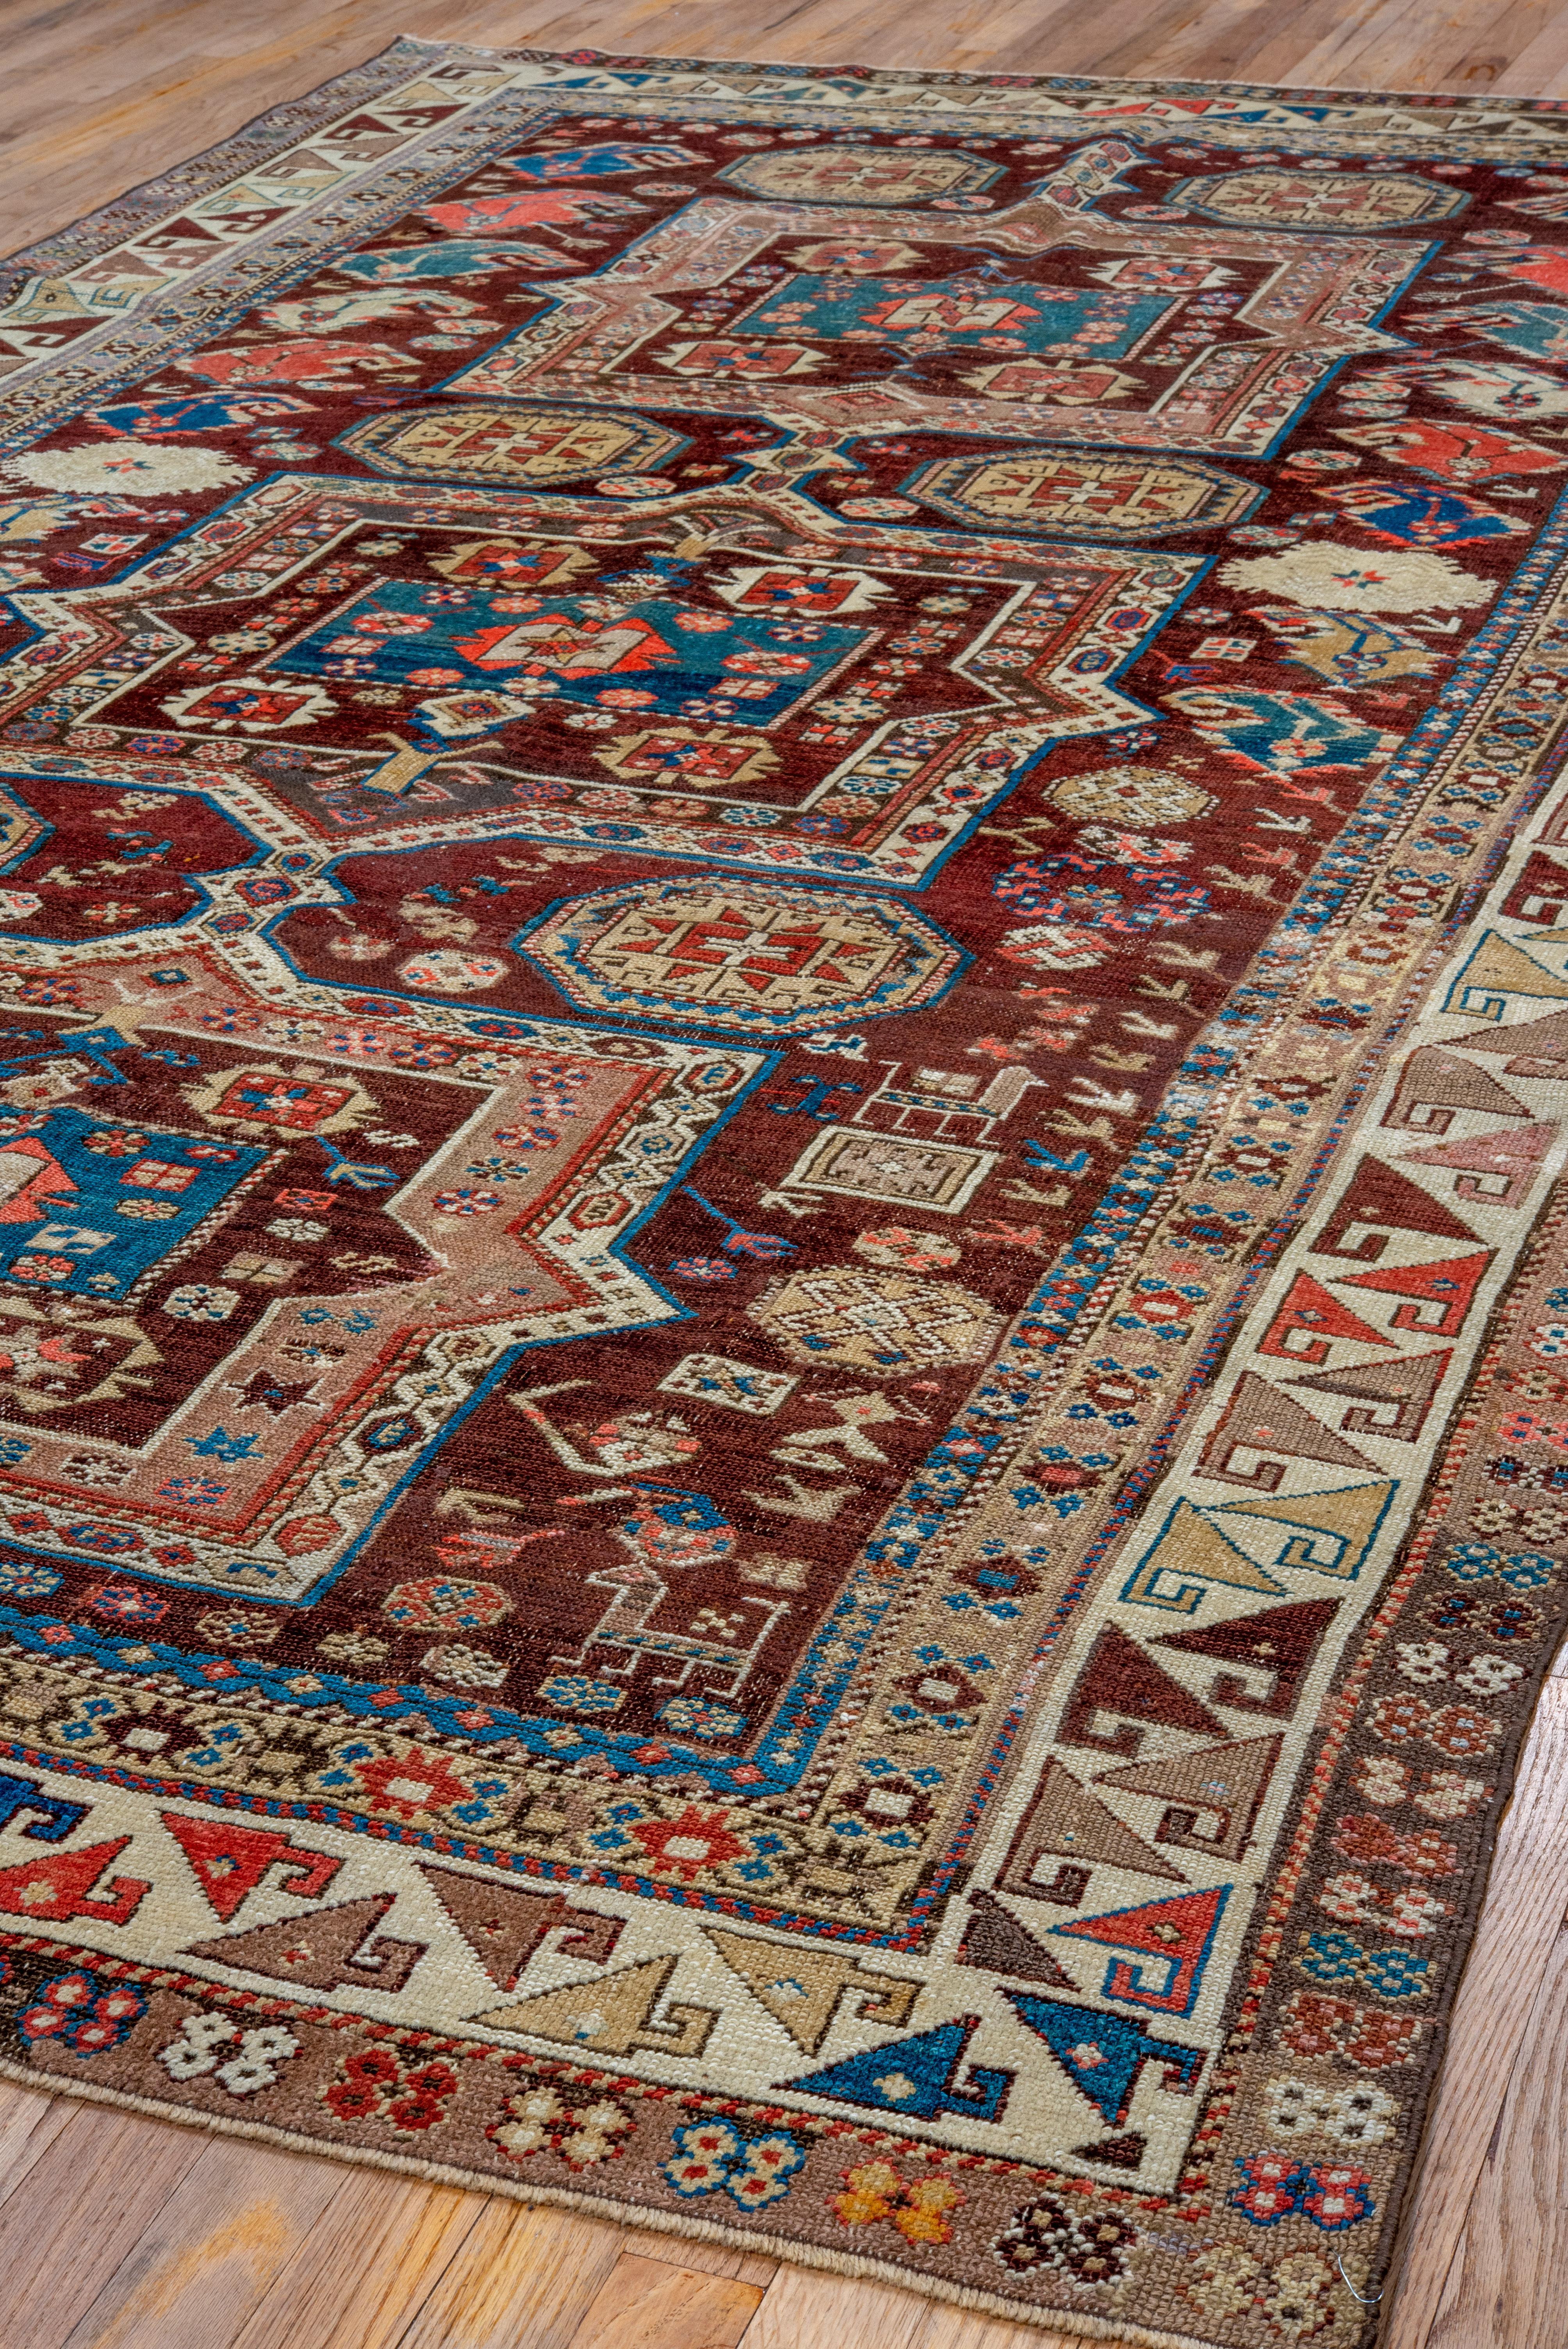 Hand-Knotted Rare Well Woven Colorful Caucasian Shirvan Rug, circa 1920s